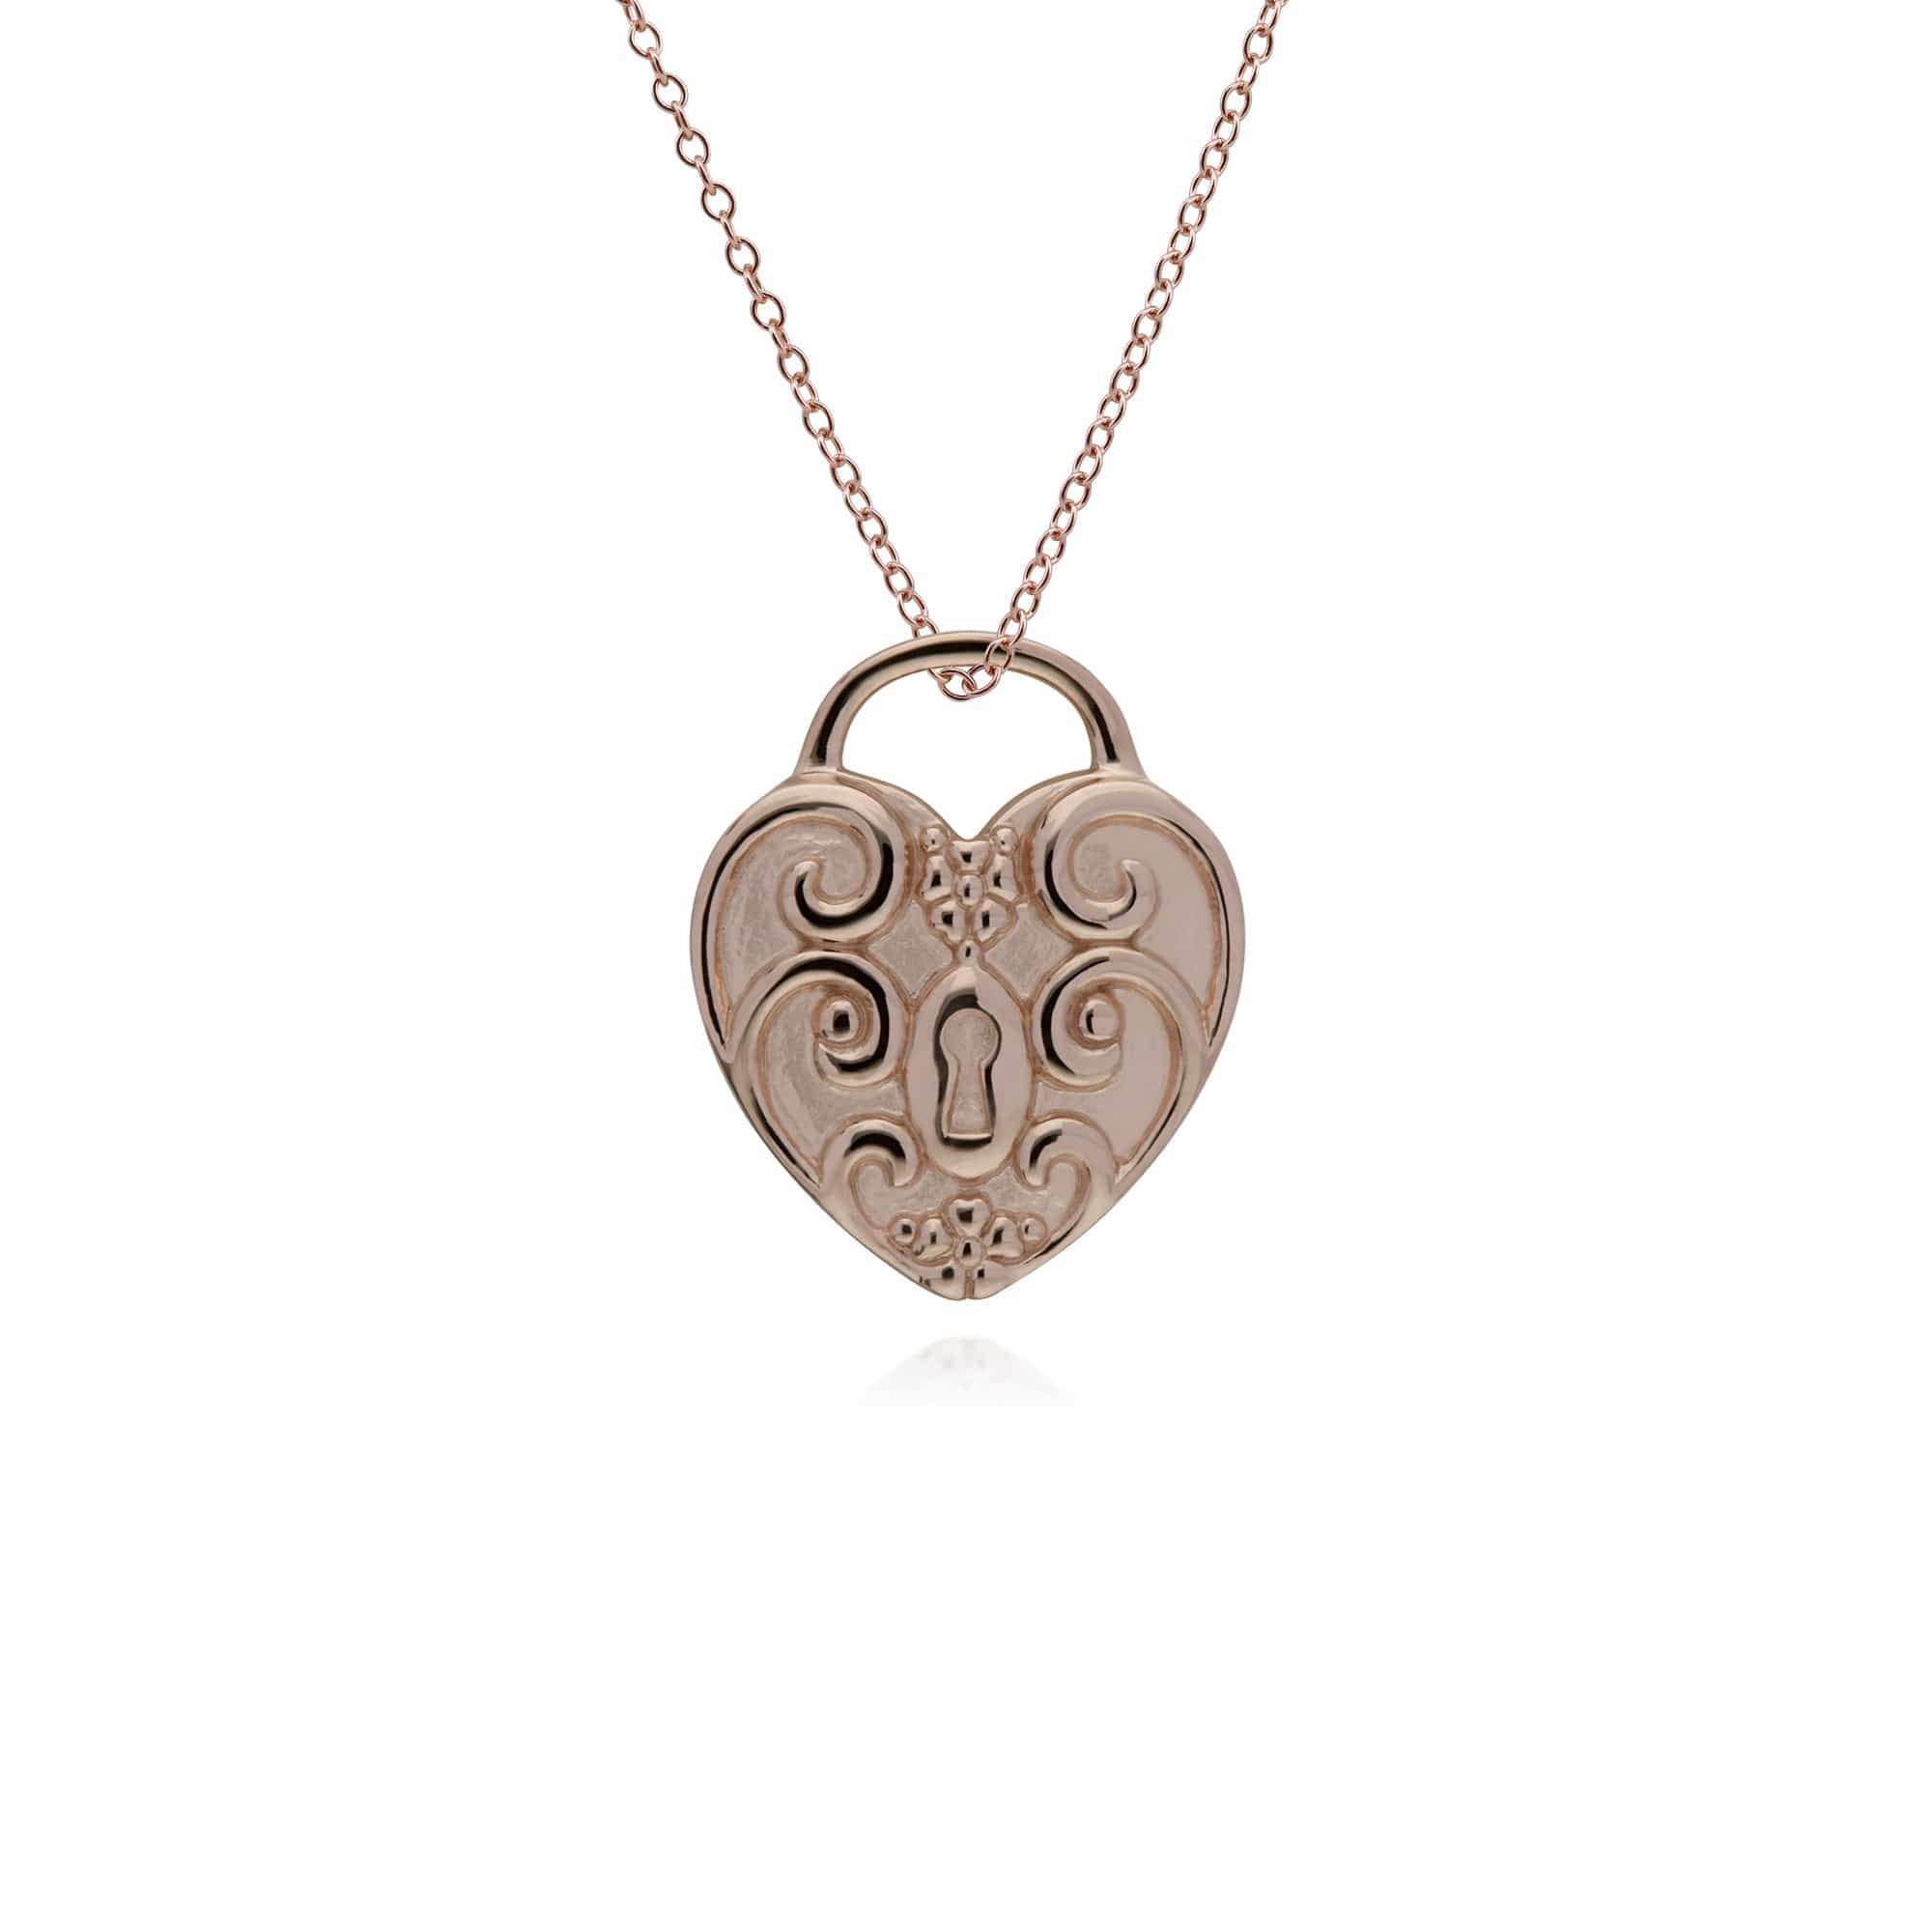 270P027301925-270P026501925 Classic Swirl Heart Lock Pendant & Amethyst Charm in Rose Gold Plated 925 Sterling Silver 3